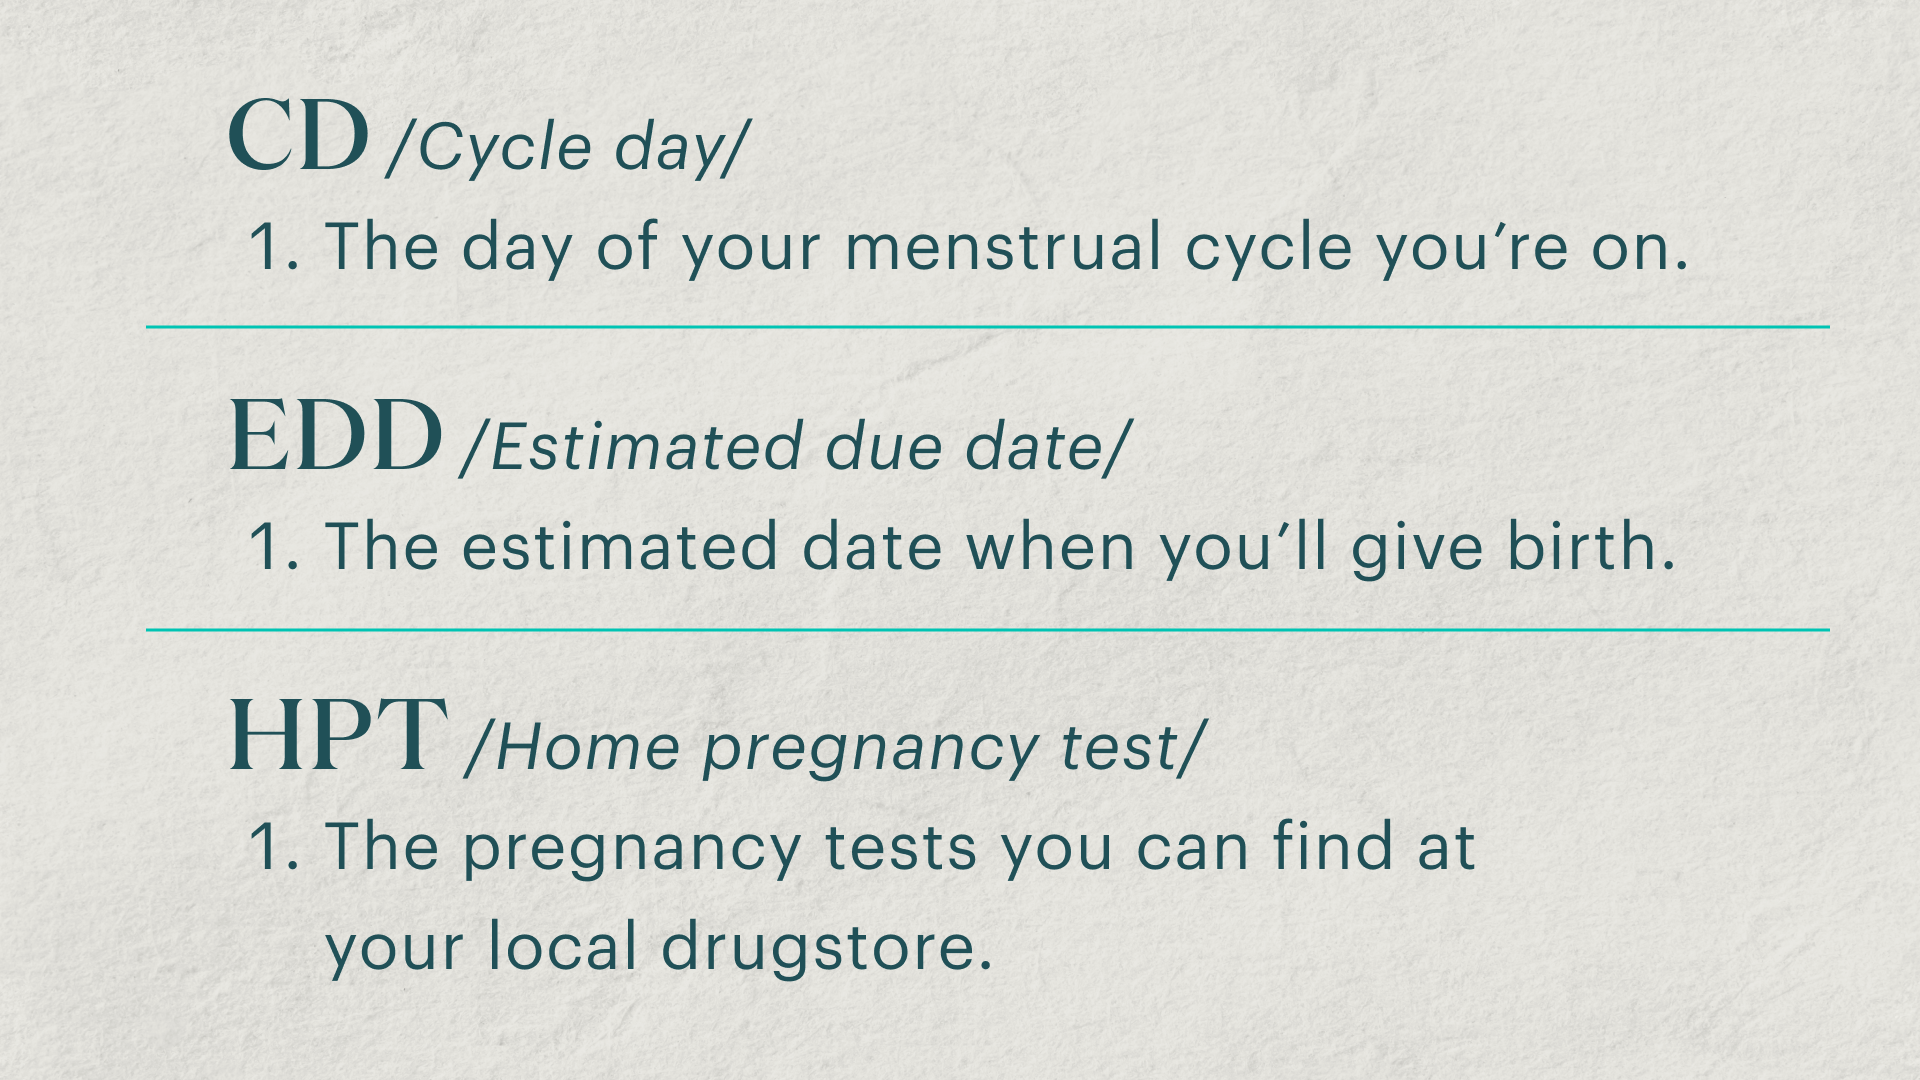 CD: The day of your menstrual cycle you're on / EDD: The estimated date when you'll give birth / HPT: The pregnancy tests you can find at your local drugstore